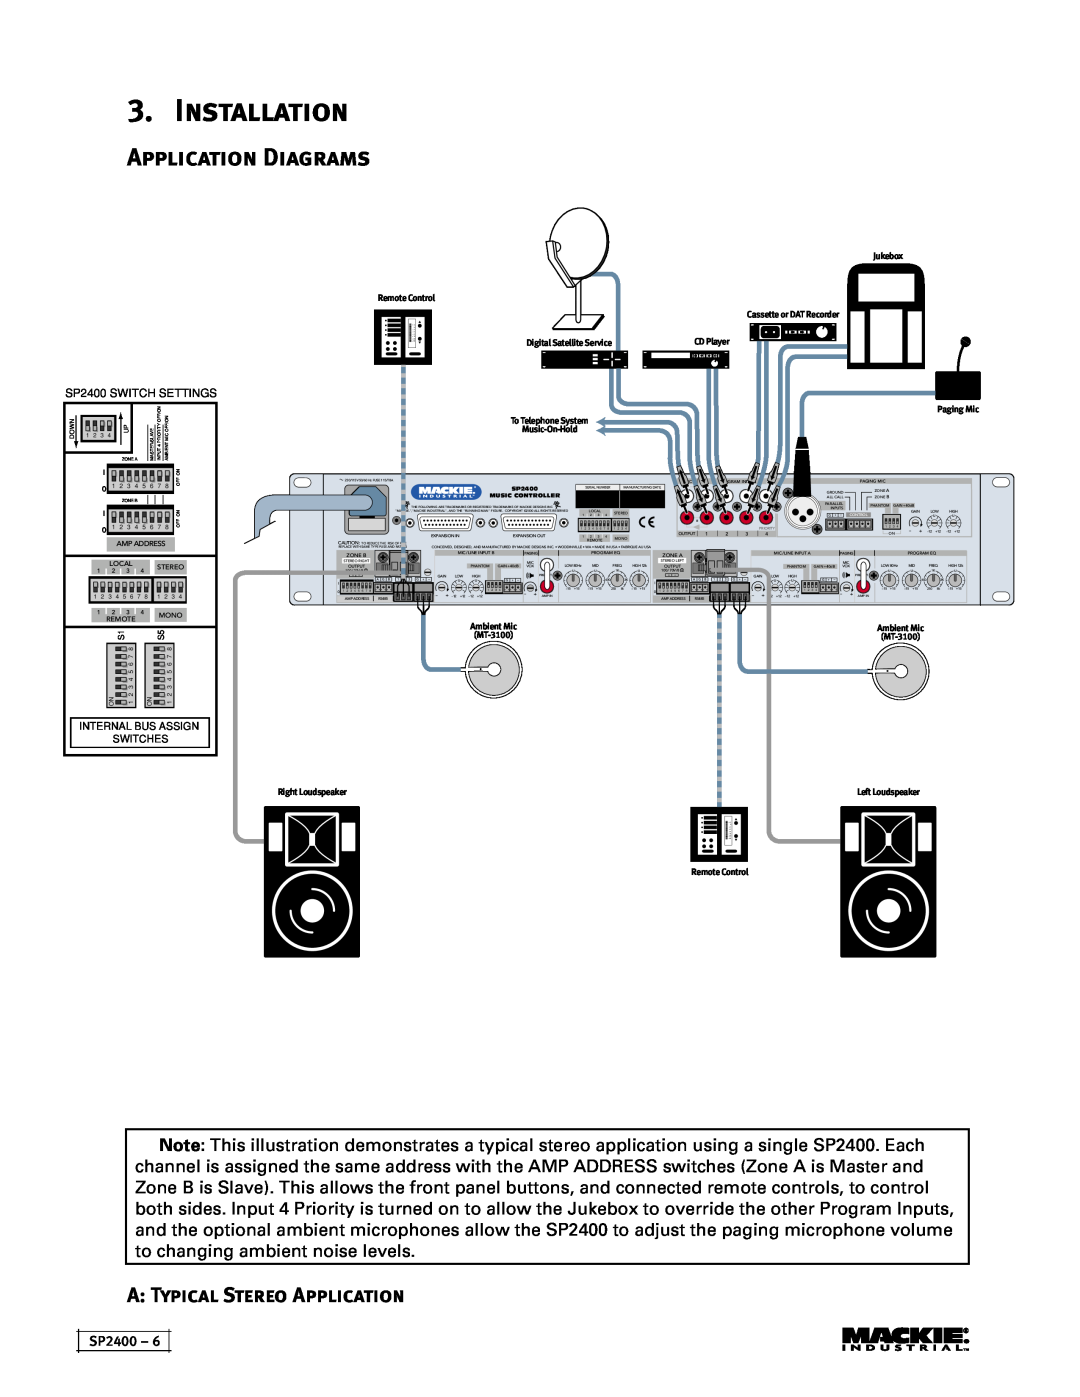 Mackie Installation, Application Diagrams, A Typical Stereo Application, SP2400 SWITCH SETTINGS, Music-On-Hold, MT-3100 